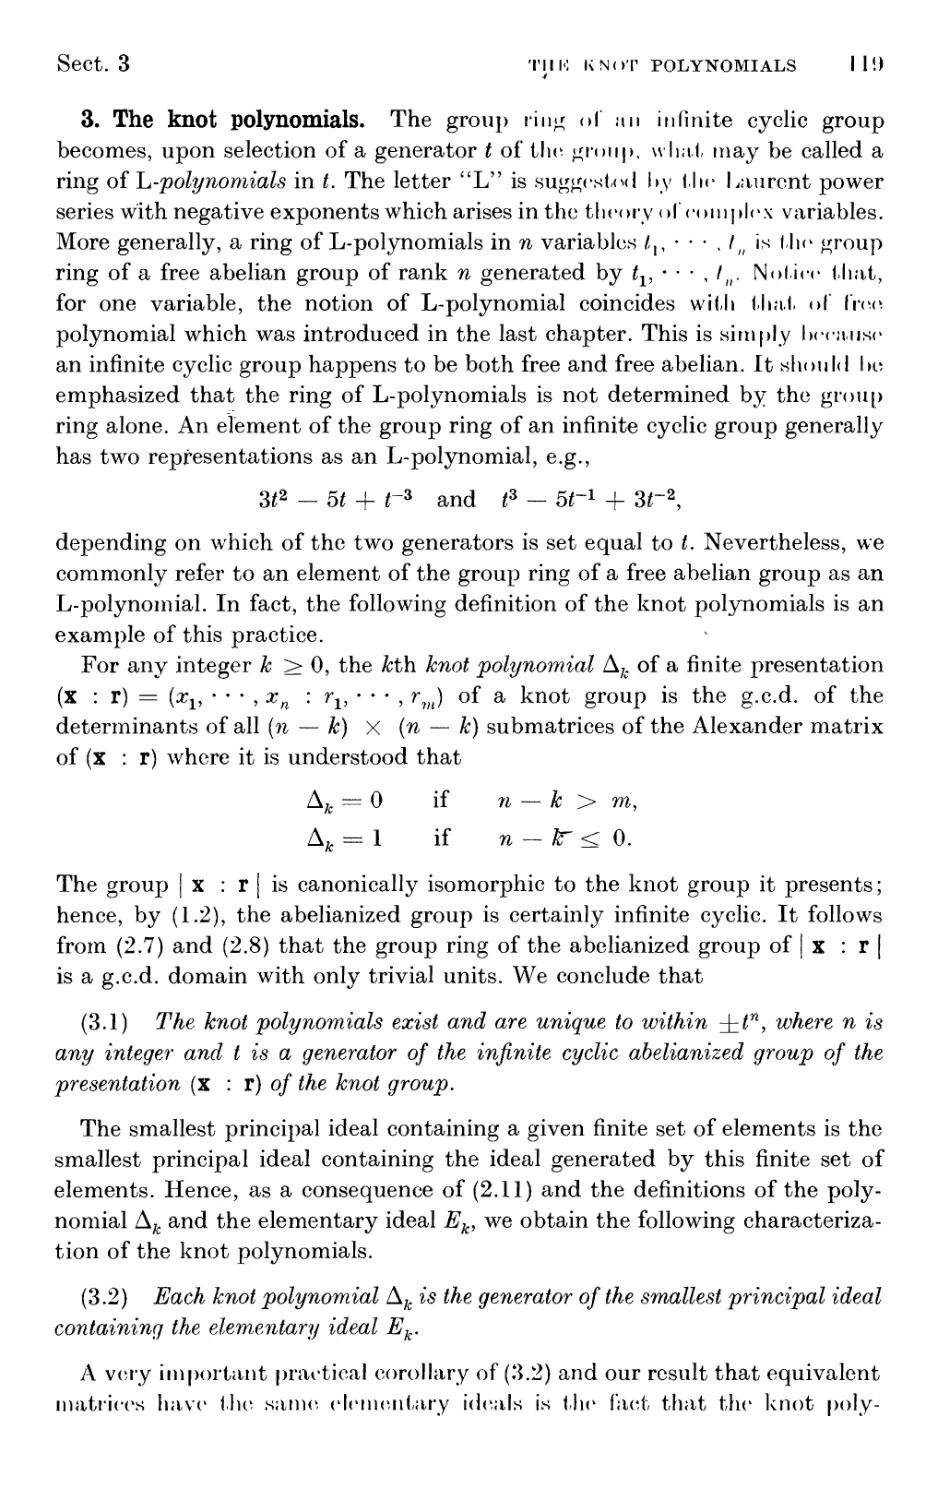 3. The knot polynomials